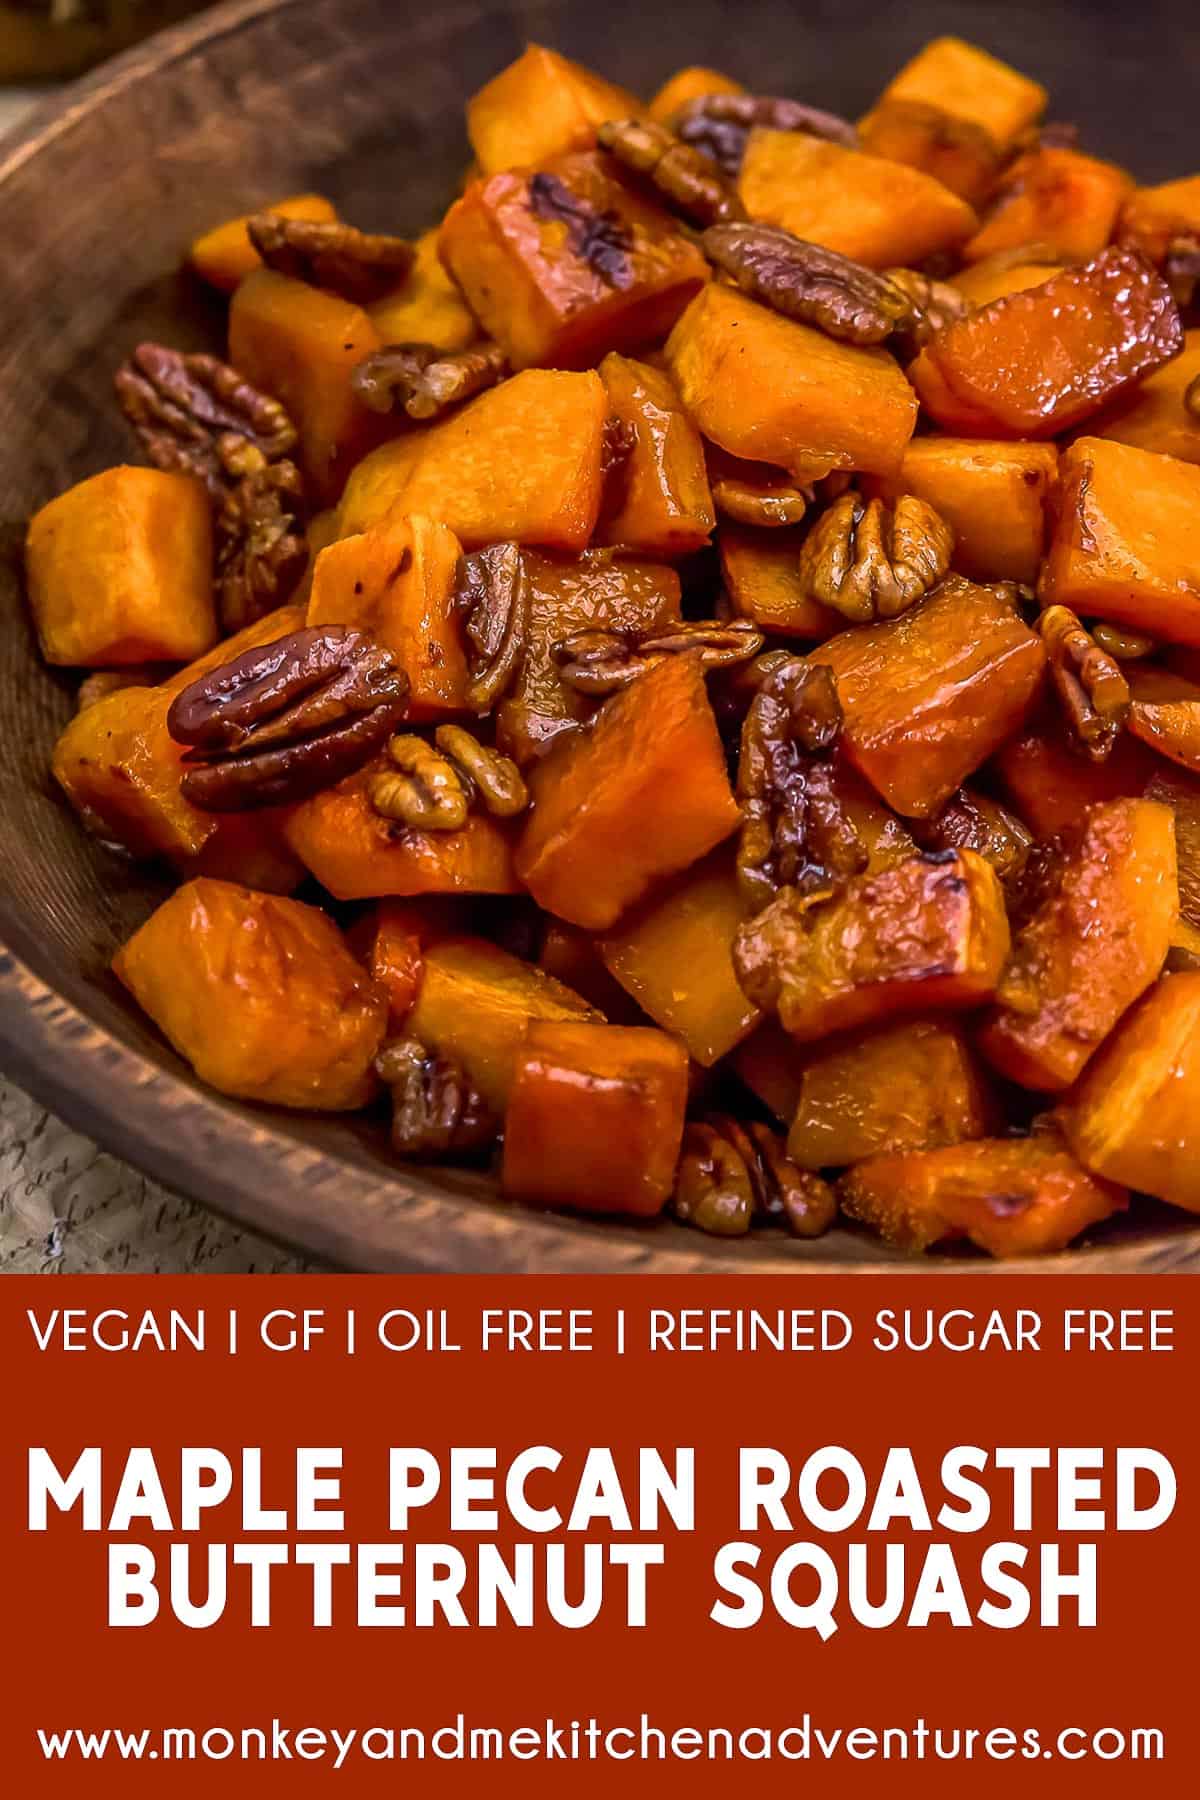 Maple Pecan Roasted Butternut Squash with text description